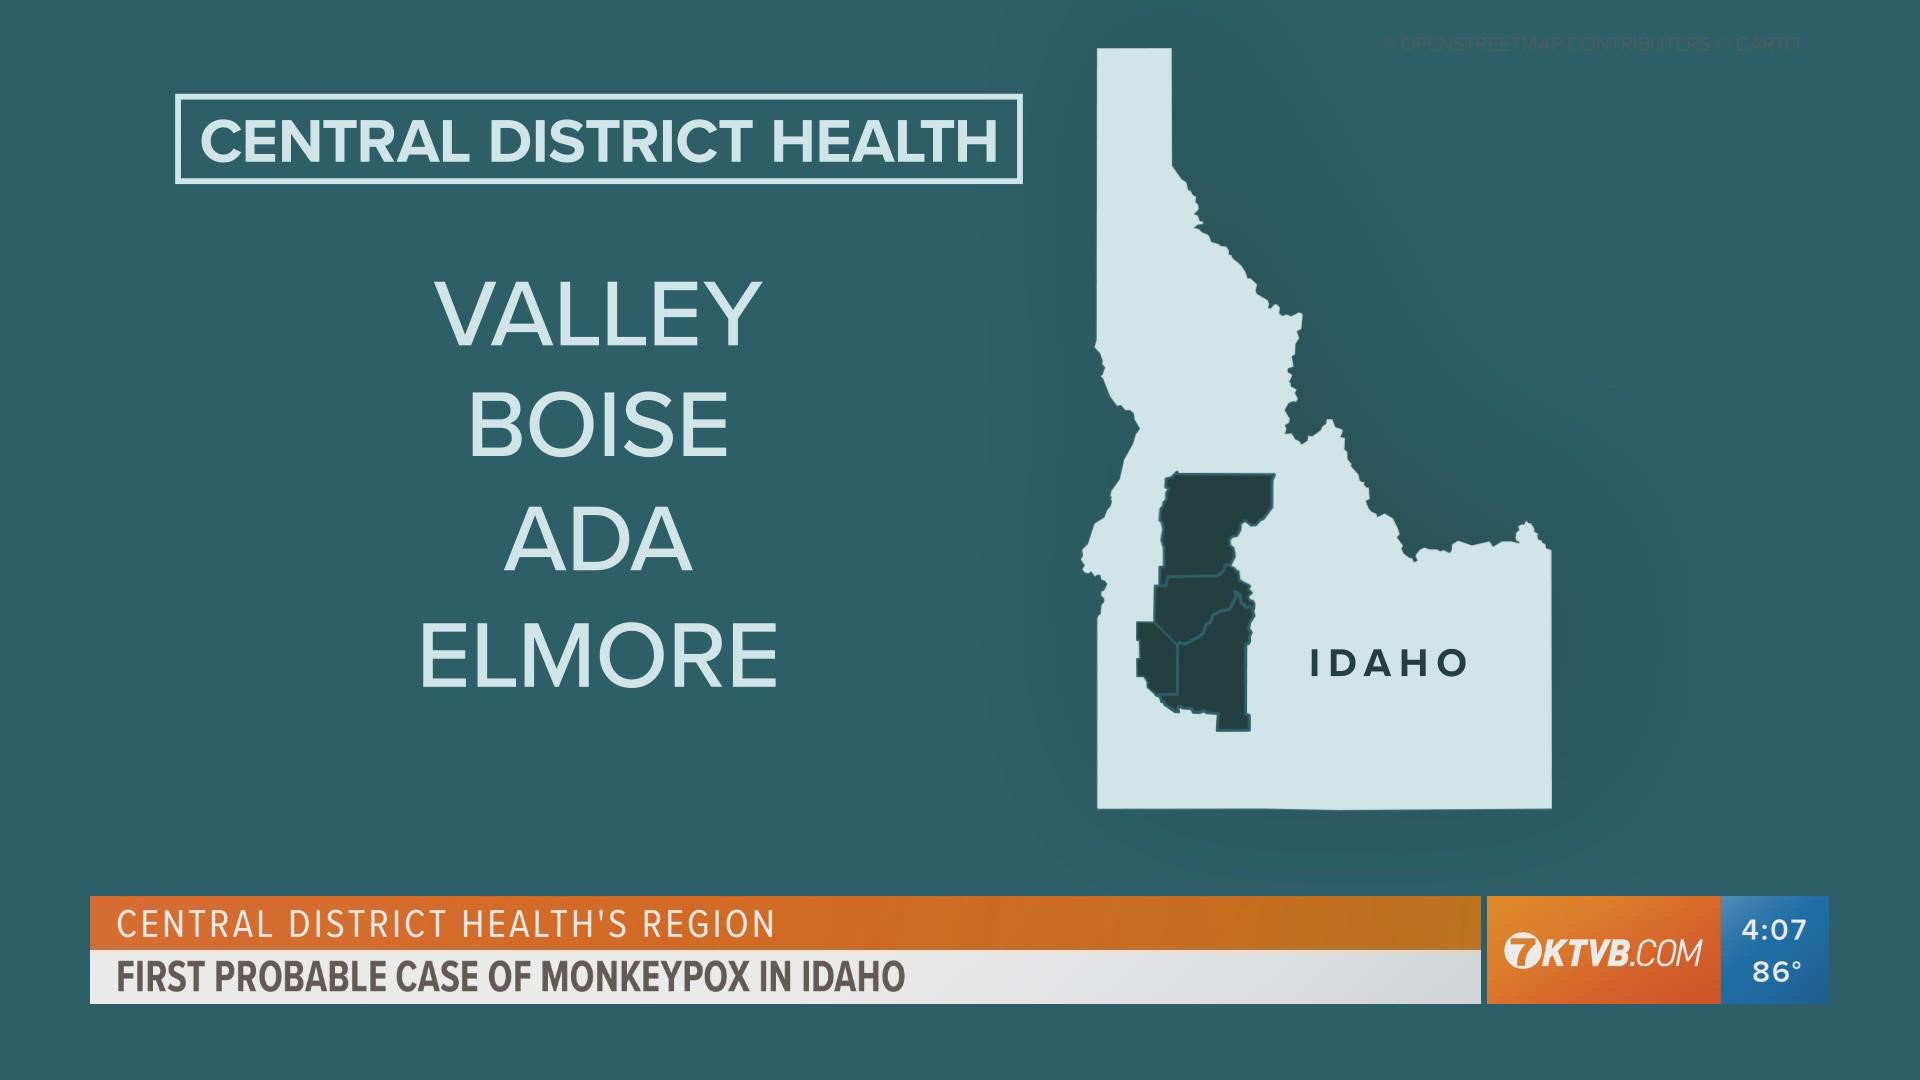 Health officials have identified the first probable monkeypox case in Idaho, the Idaho Division of Public Health and Central District Health announced Wednesday.